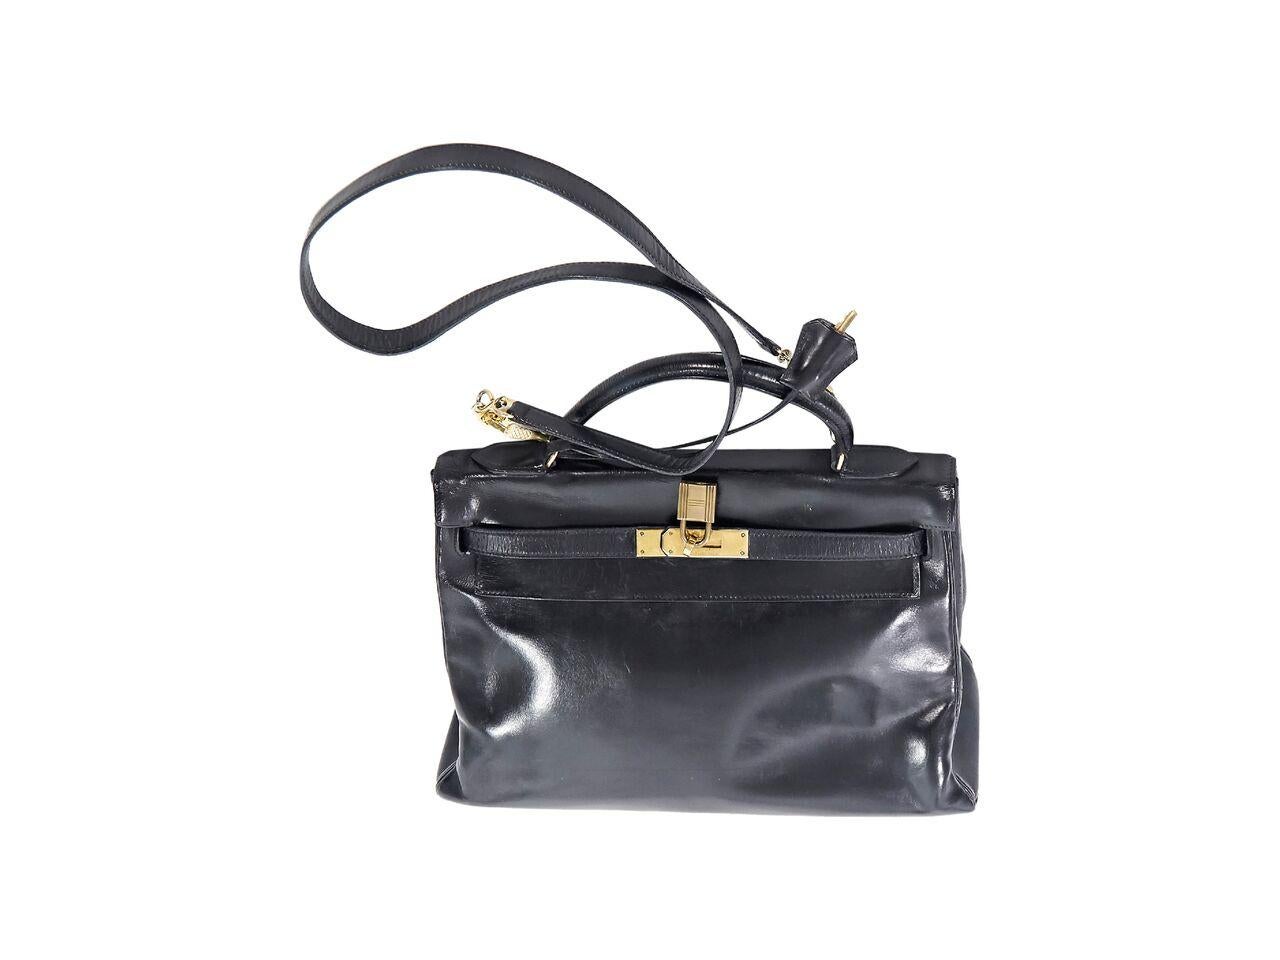 Product details:  Vintage black Kelly Retourne 28cm leather satchel by Hermes.  Top carry handle.  Detachable crossbody strap.  Front flap with lock and key closure.  Leather lined interior with inner zip and slide pockets.  Protective metal feet. 